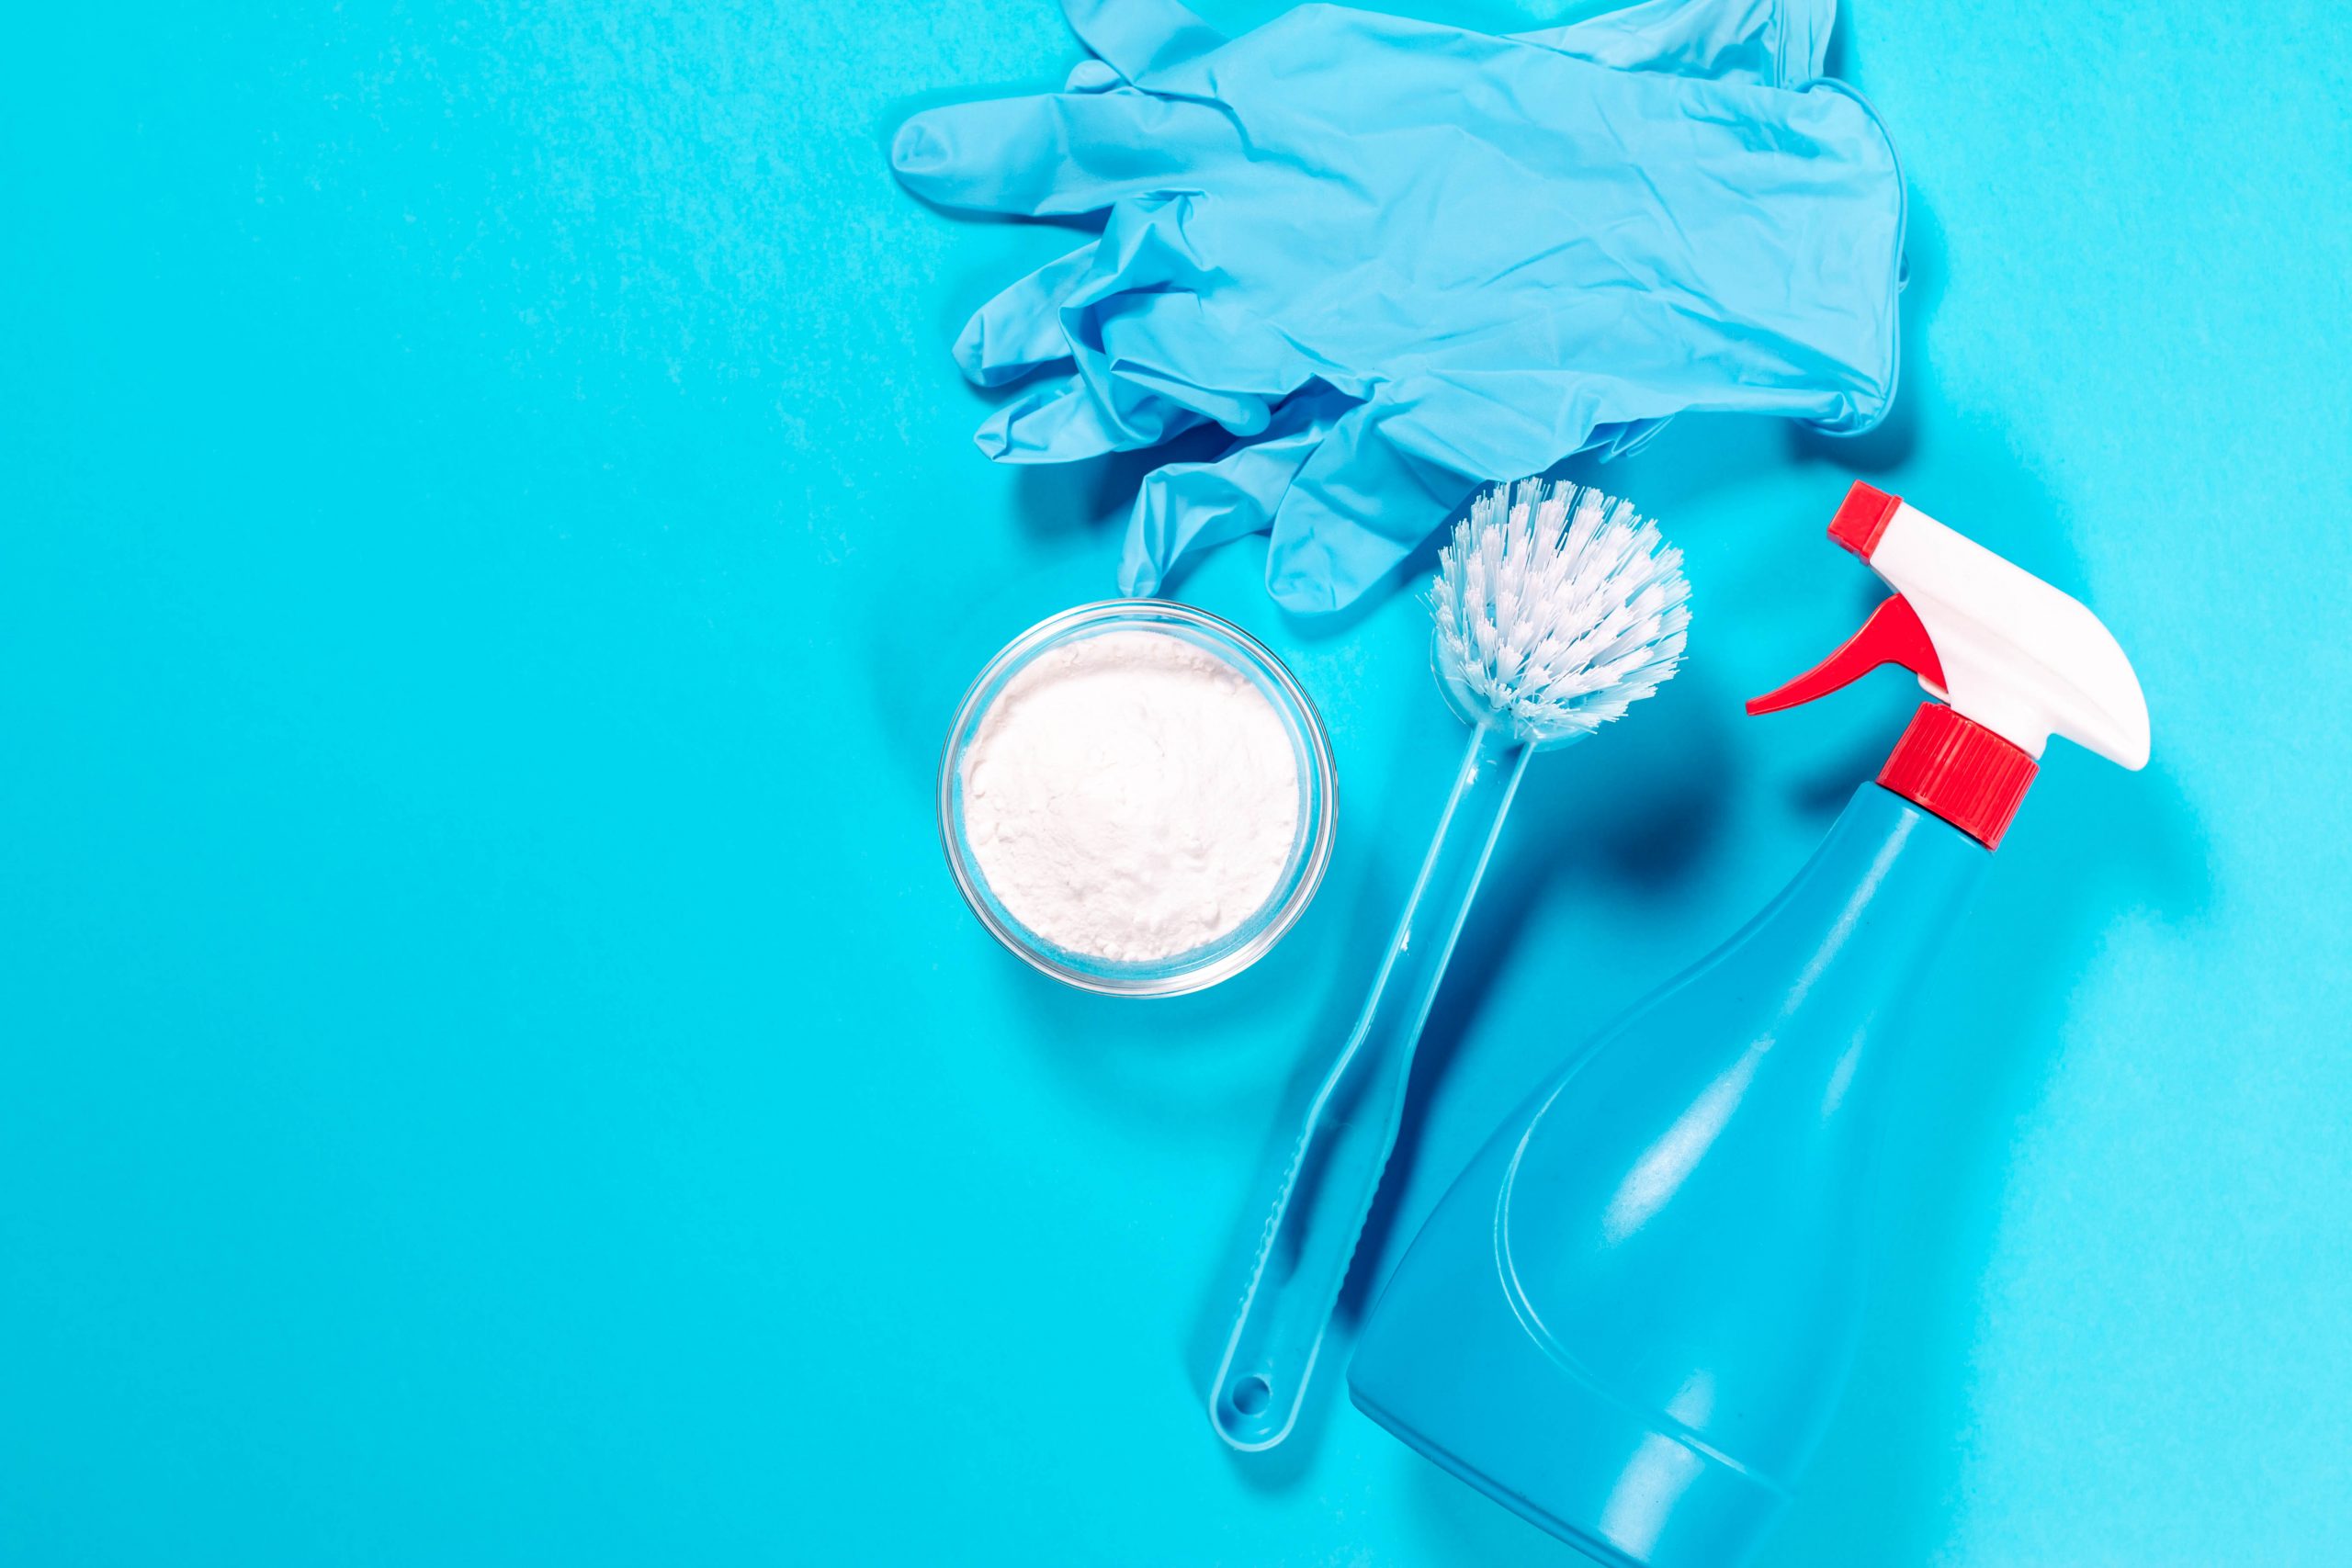 Why You Should Switch to Non-Toxic Cleaning Products